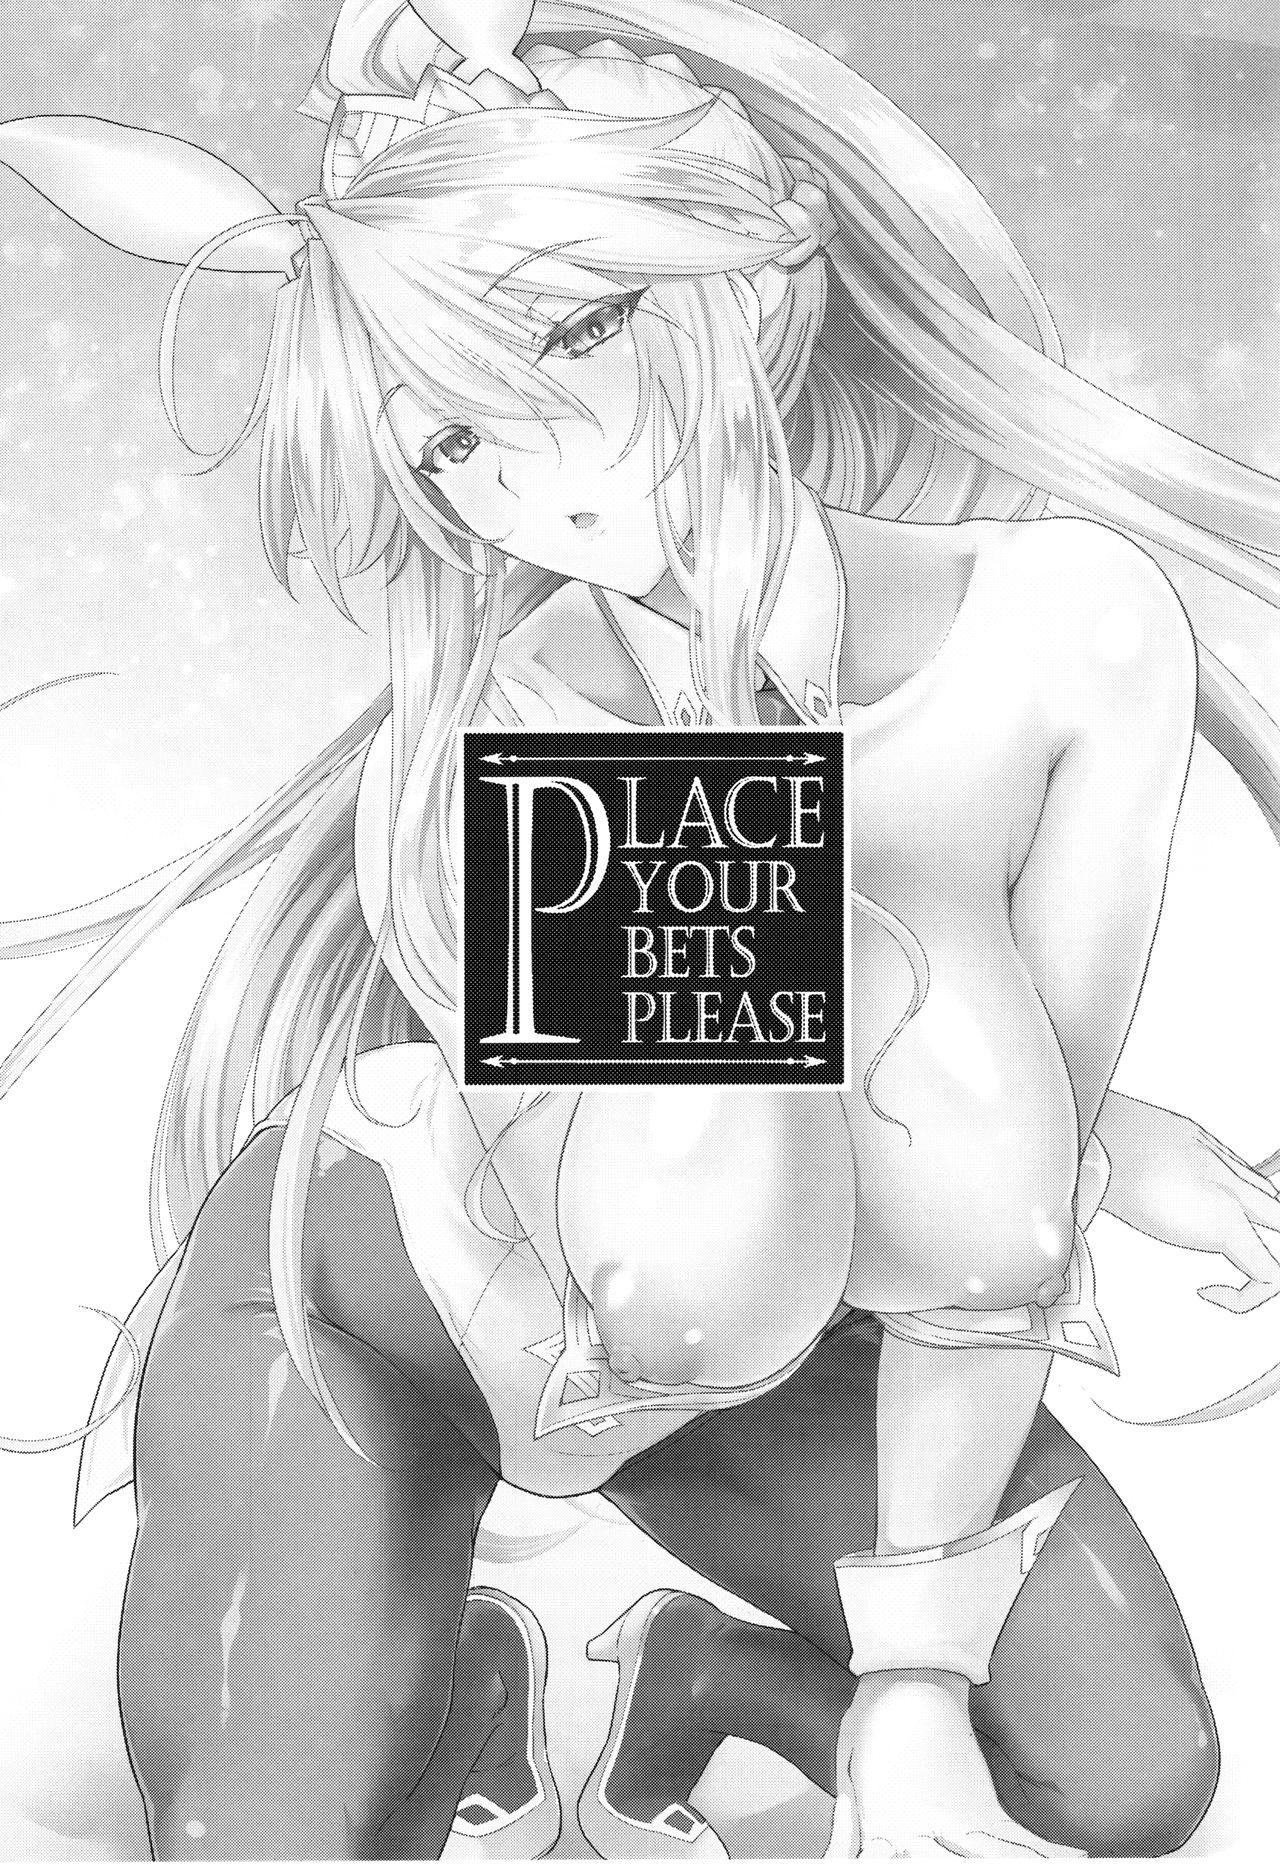 Amateur Porn Free Place your bets please - Fate grand order 18 Porn - Page 2